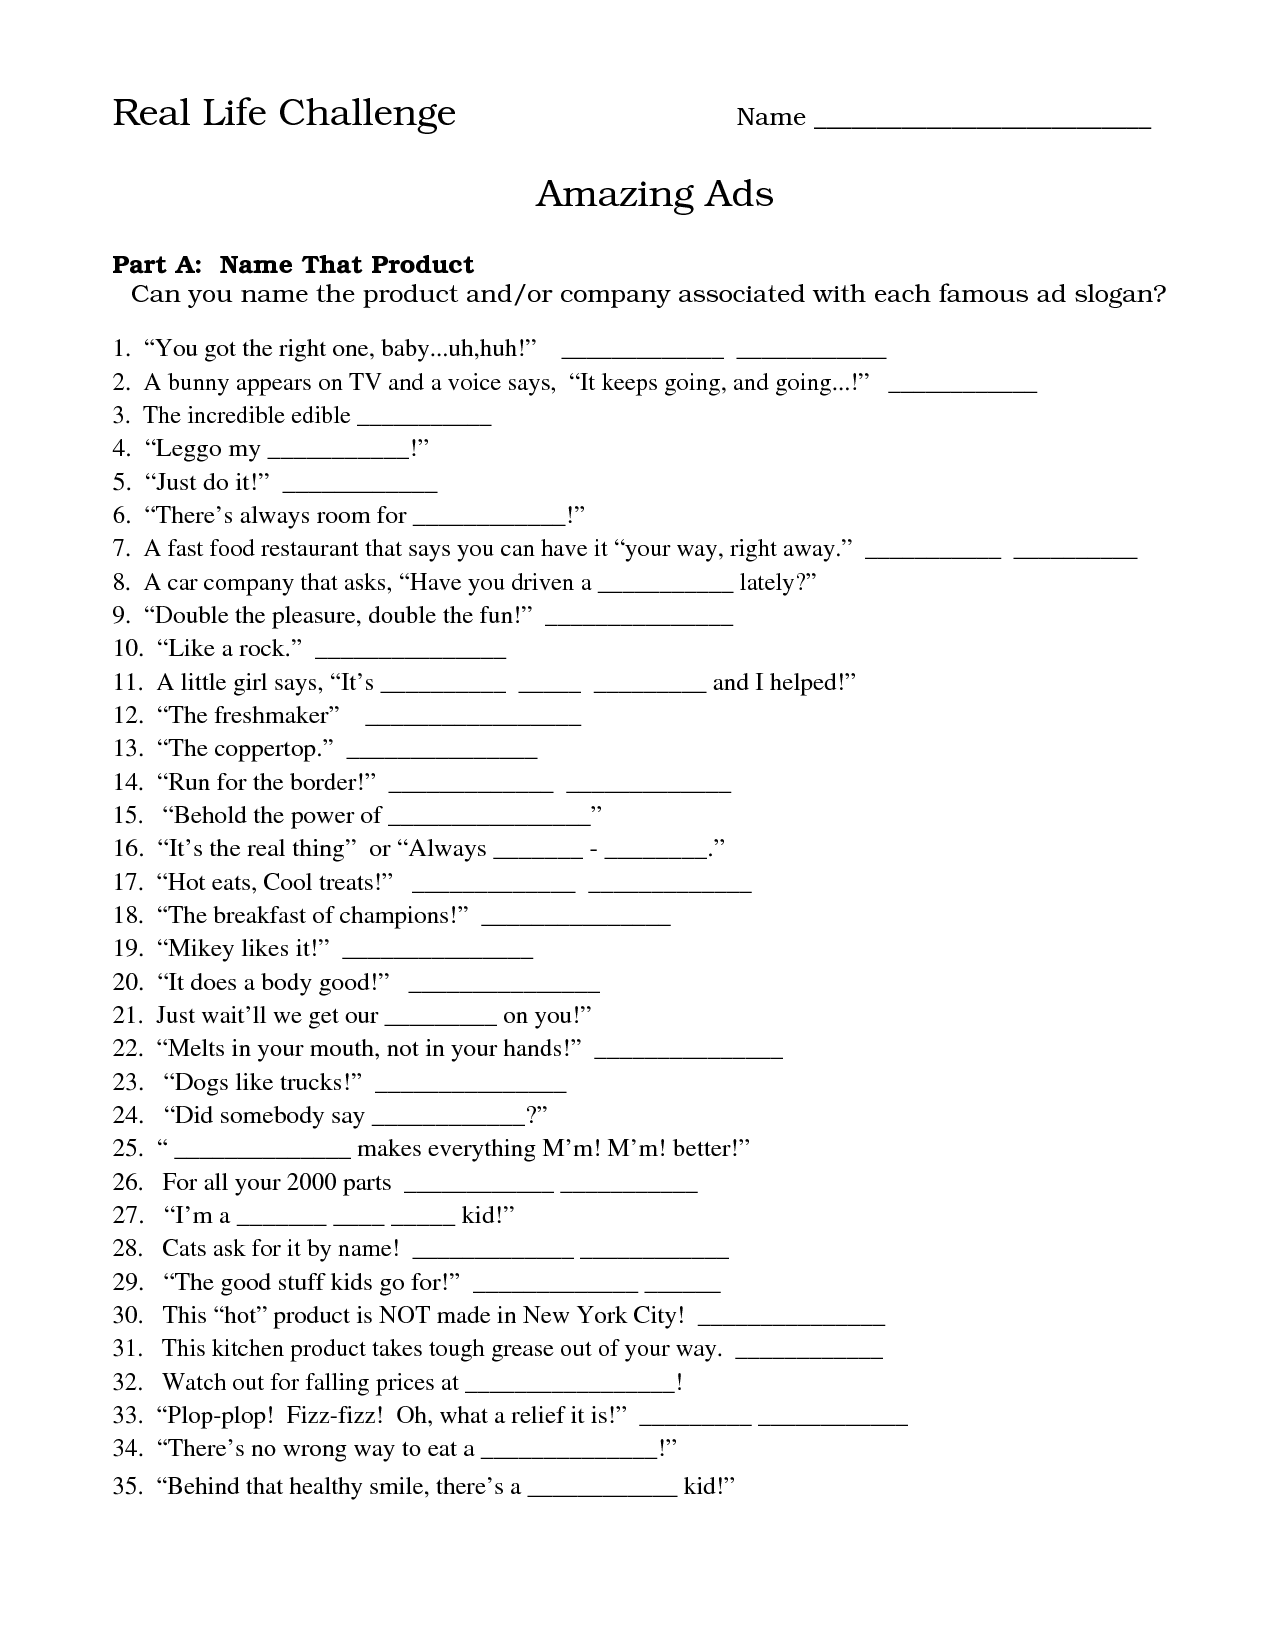 free-worksheets-for-teachers-19-best-images-of-worksheets-for-teachers